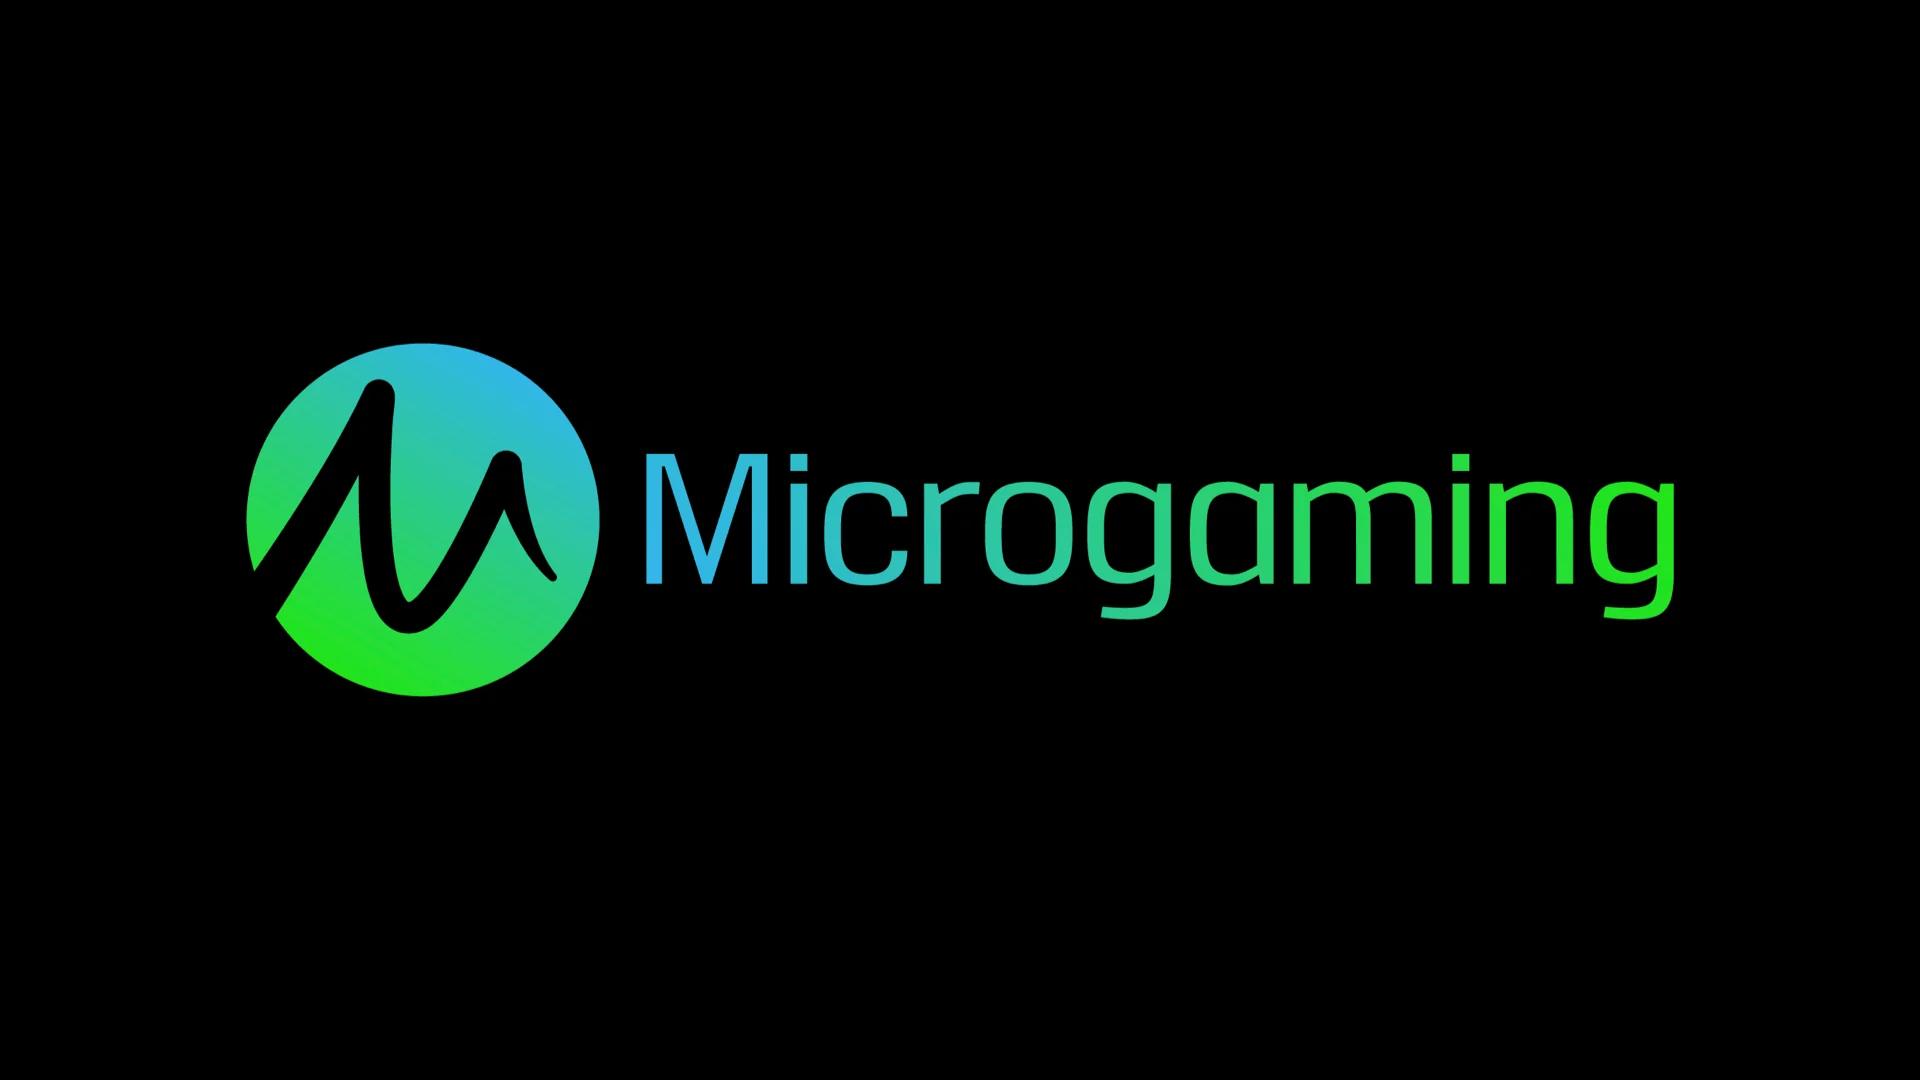 Microgaming Releases on January